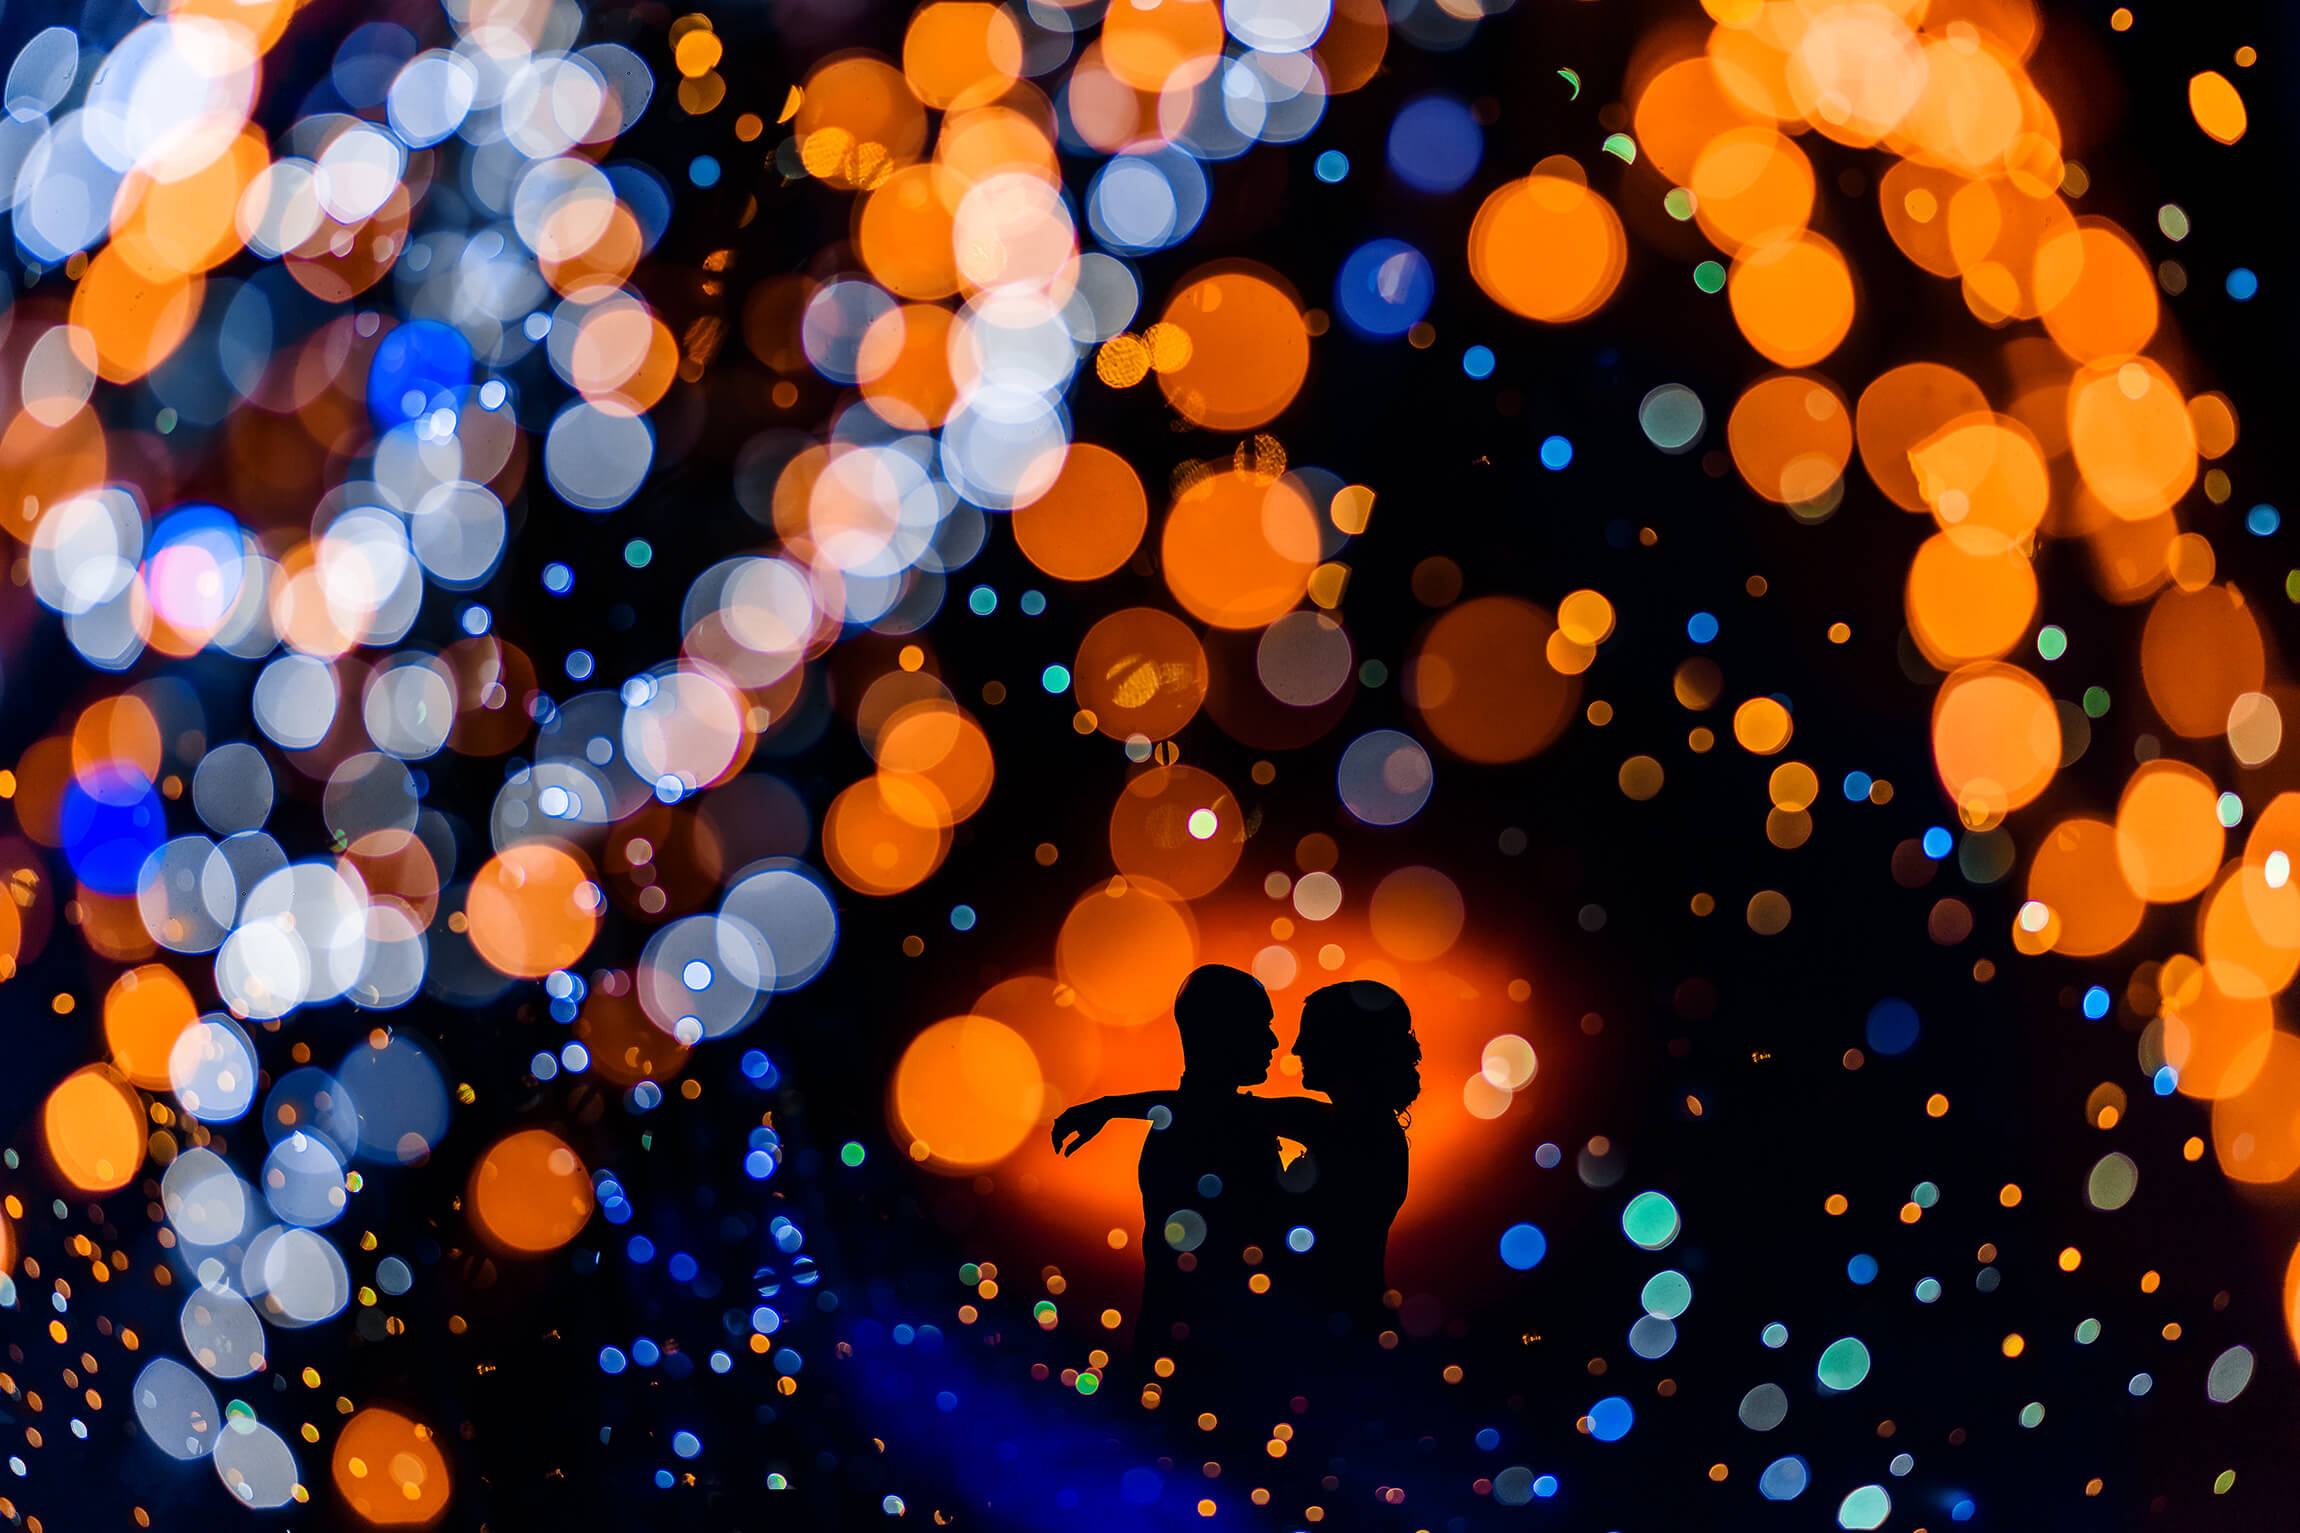 Colorful Silhouette Wedding Couple Image Taken By Carsten Schertzer a Los Angeles Based Wedding Photographer